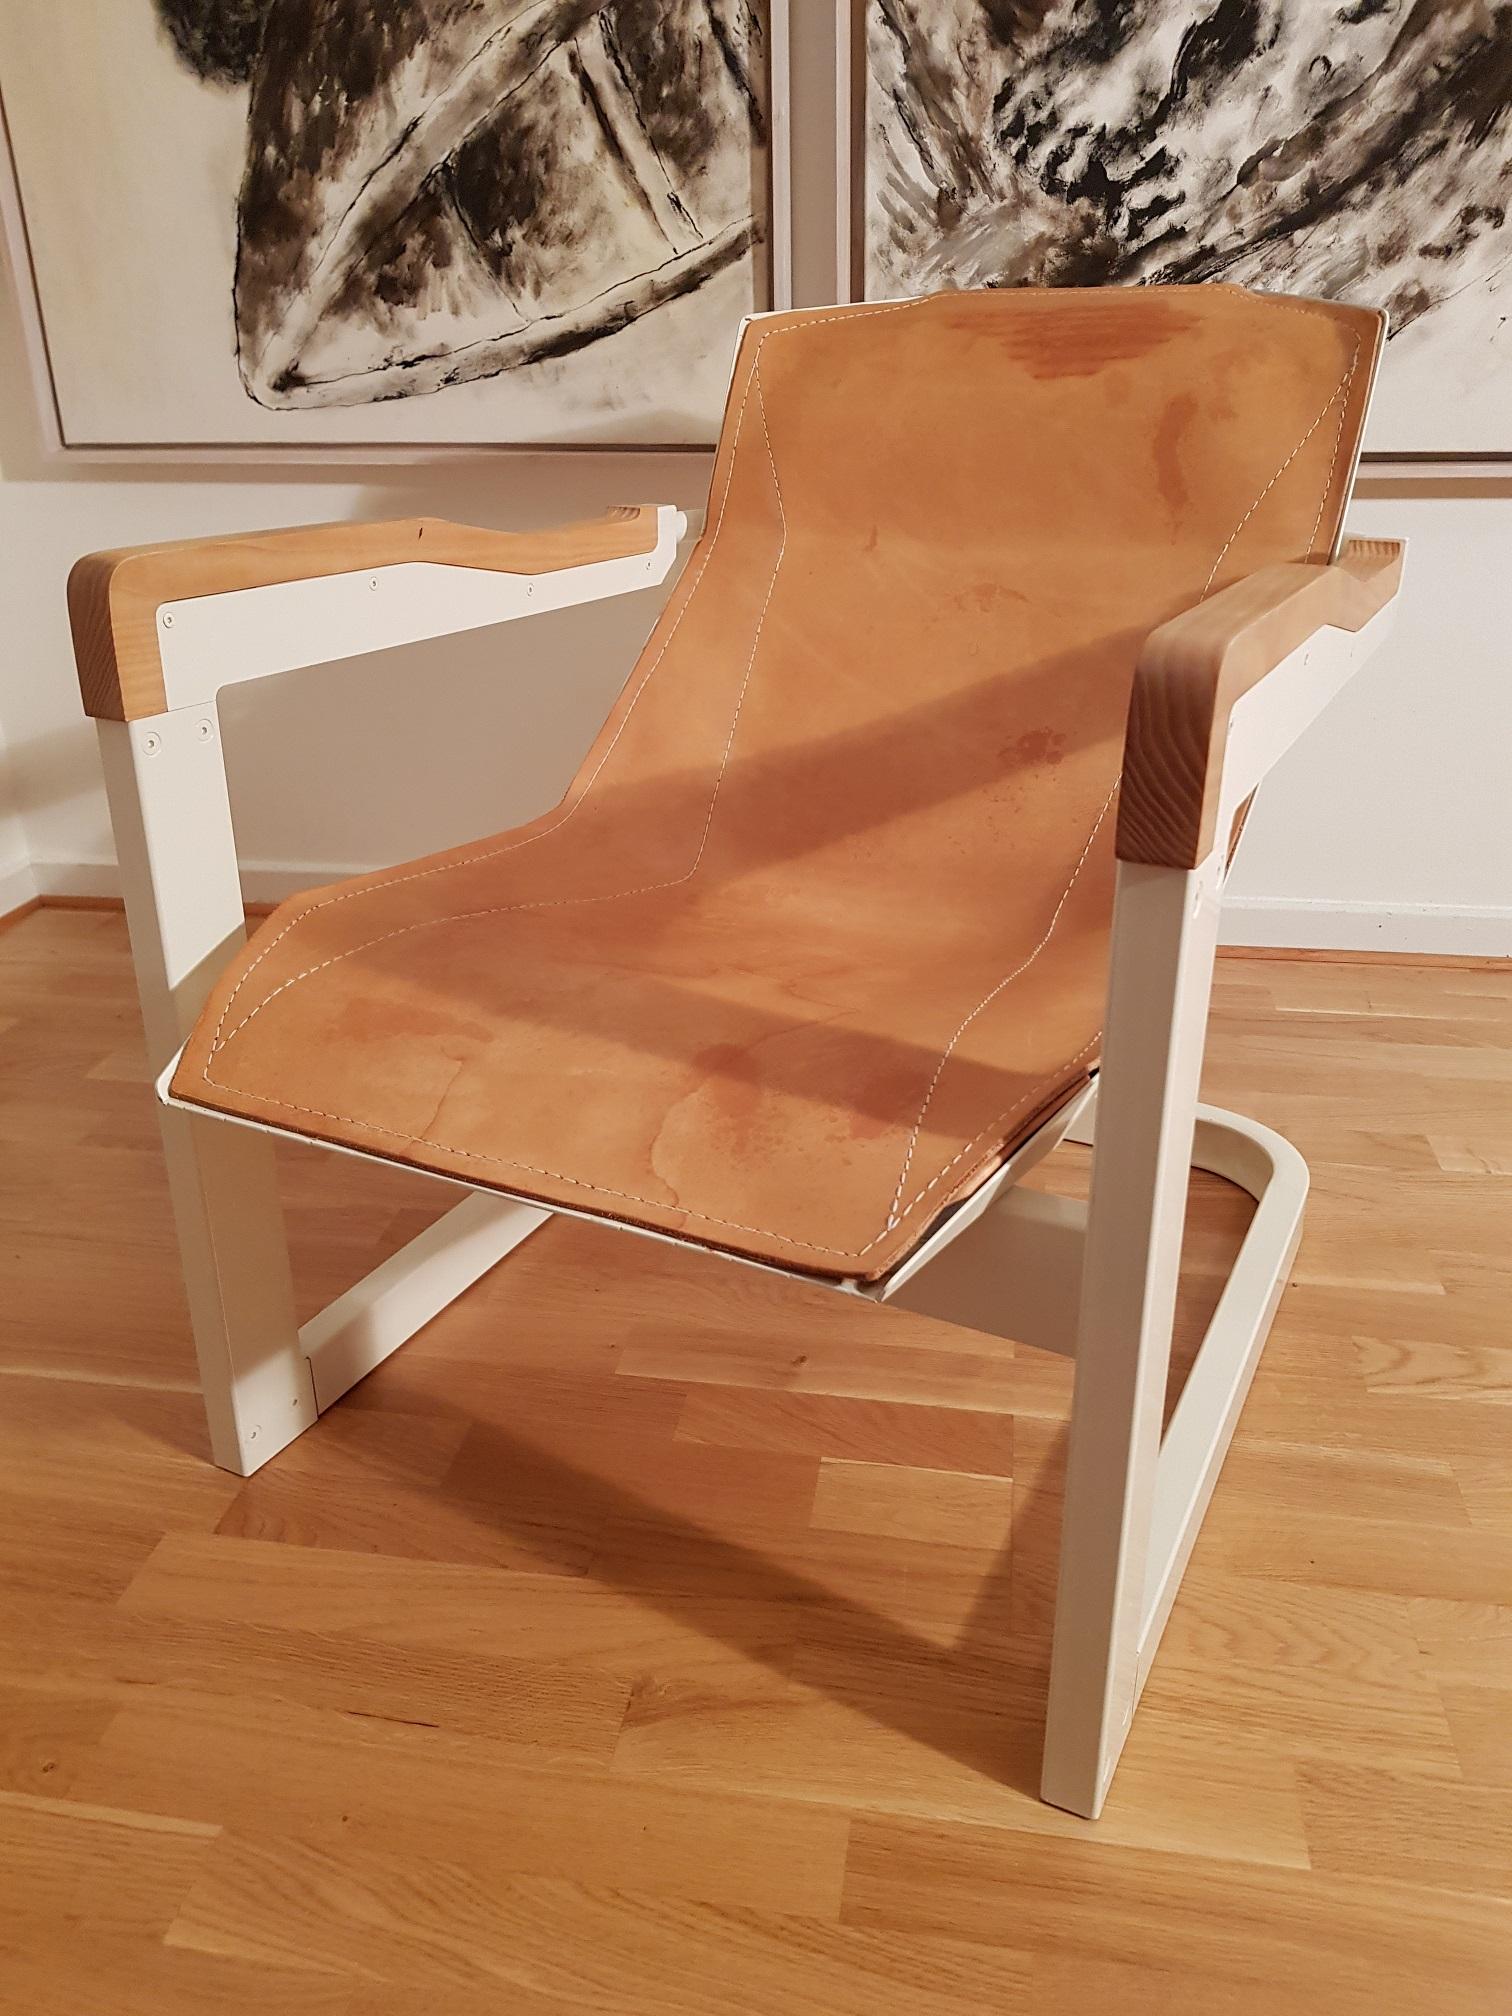 Mats Theselius Atlantic Hellride Easy Chair 1 of 3 Produced by Källemo Sweden In Good Condition For Sale In Limhamn, SE